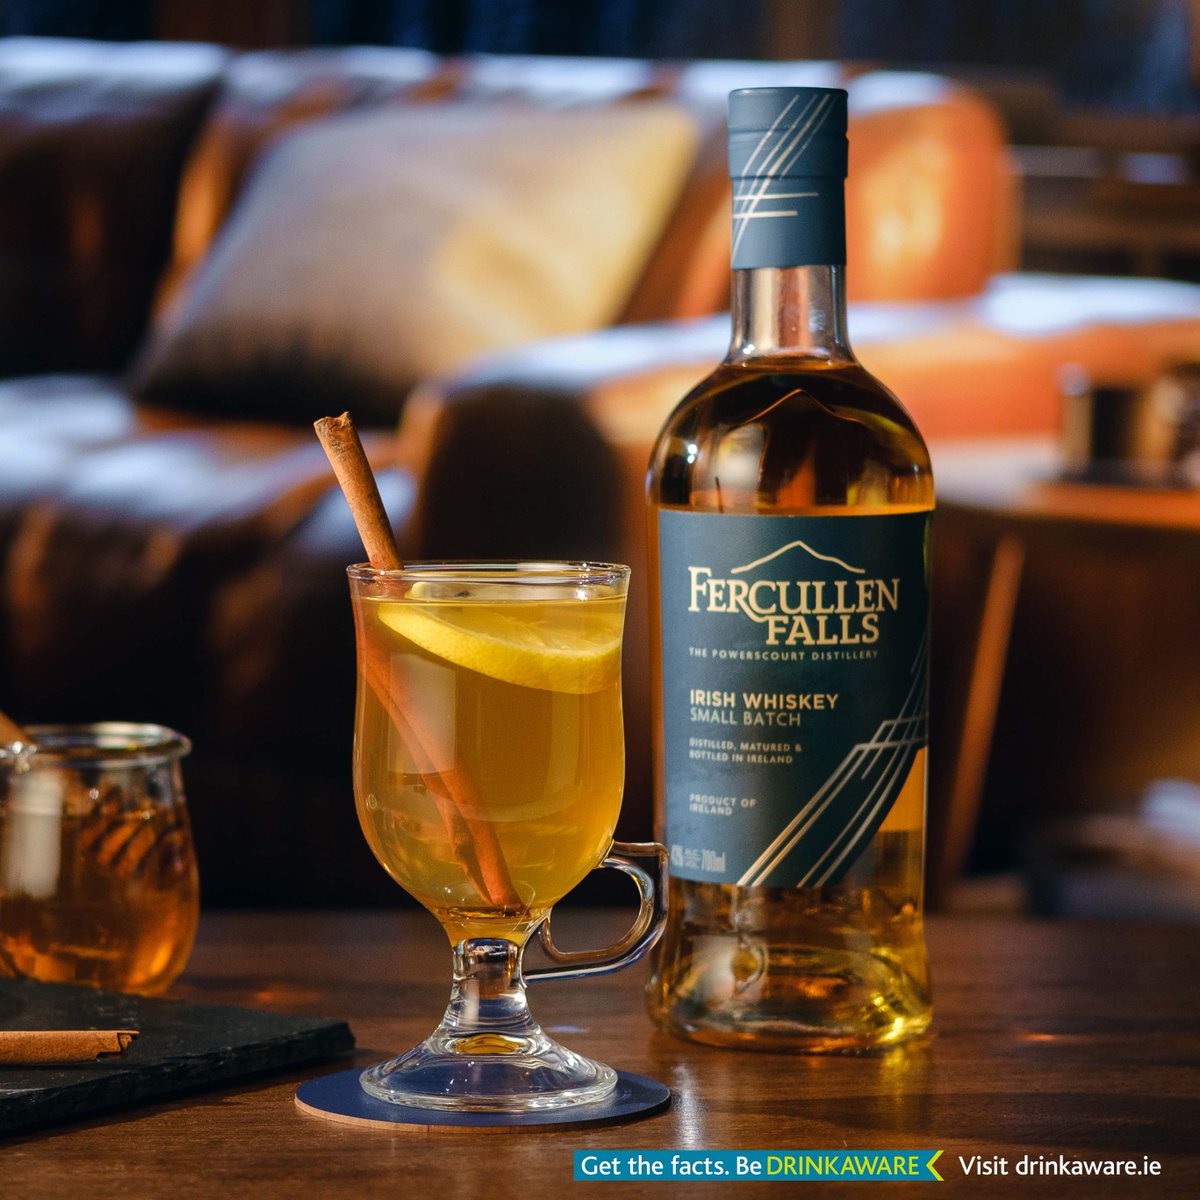 Wrap up the festivities with a cozy twist! 🎄🥃 Because the magic of Christmas lasts a little longer when shared over a warmly crafted drink. Cheers to the joy of home and the spirit of the season!

#PowerscourtDistillery #FercullenIrishWhiskey #WhiskeyCocktail #HotToddy